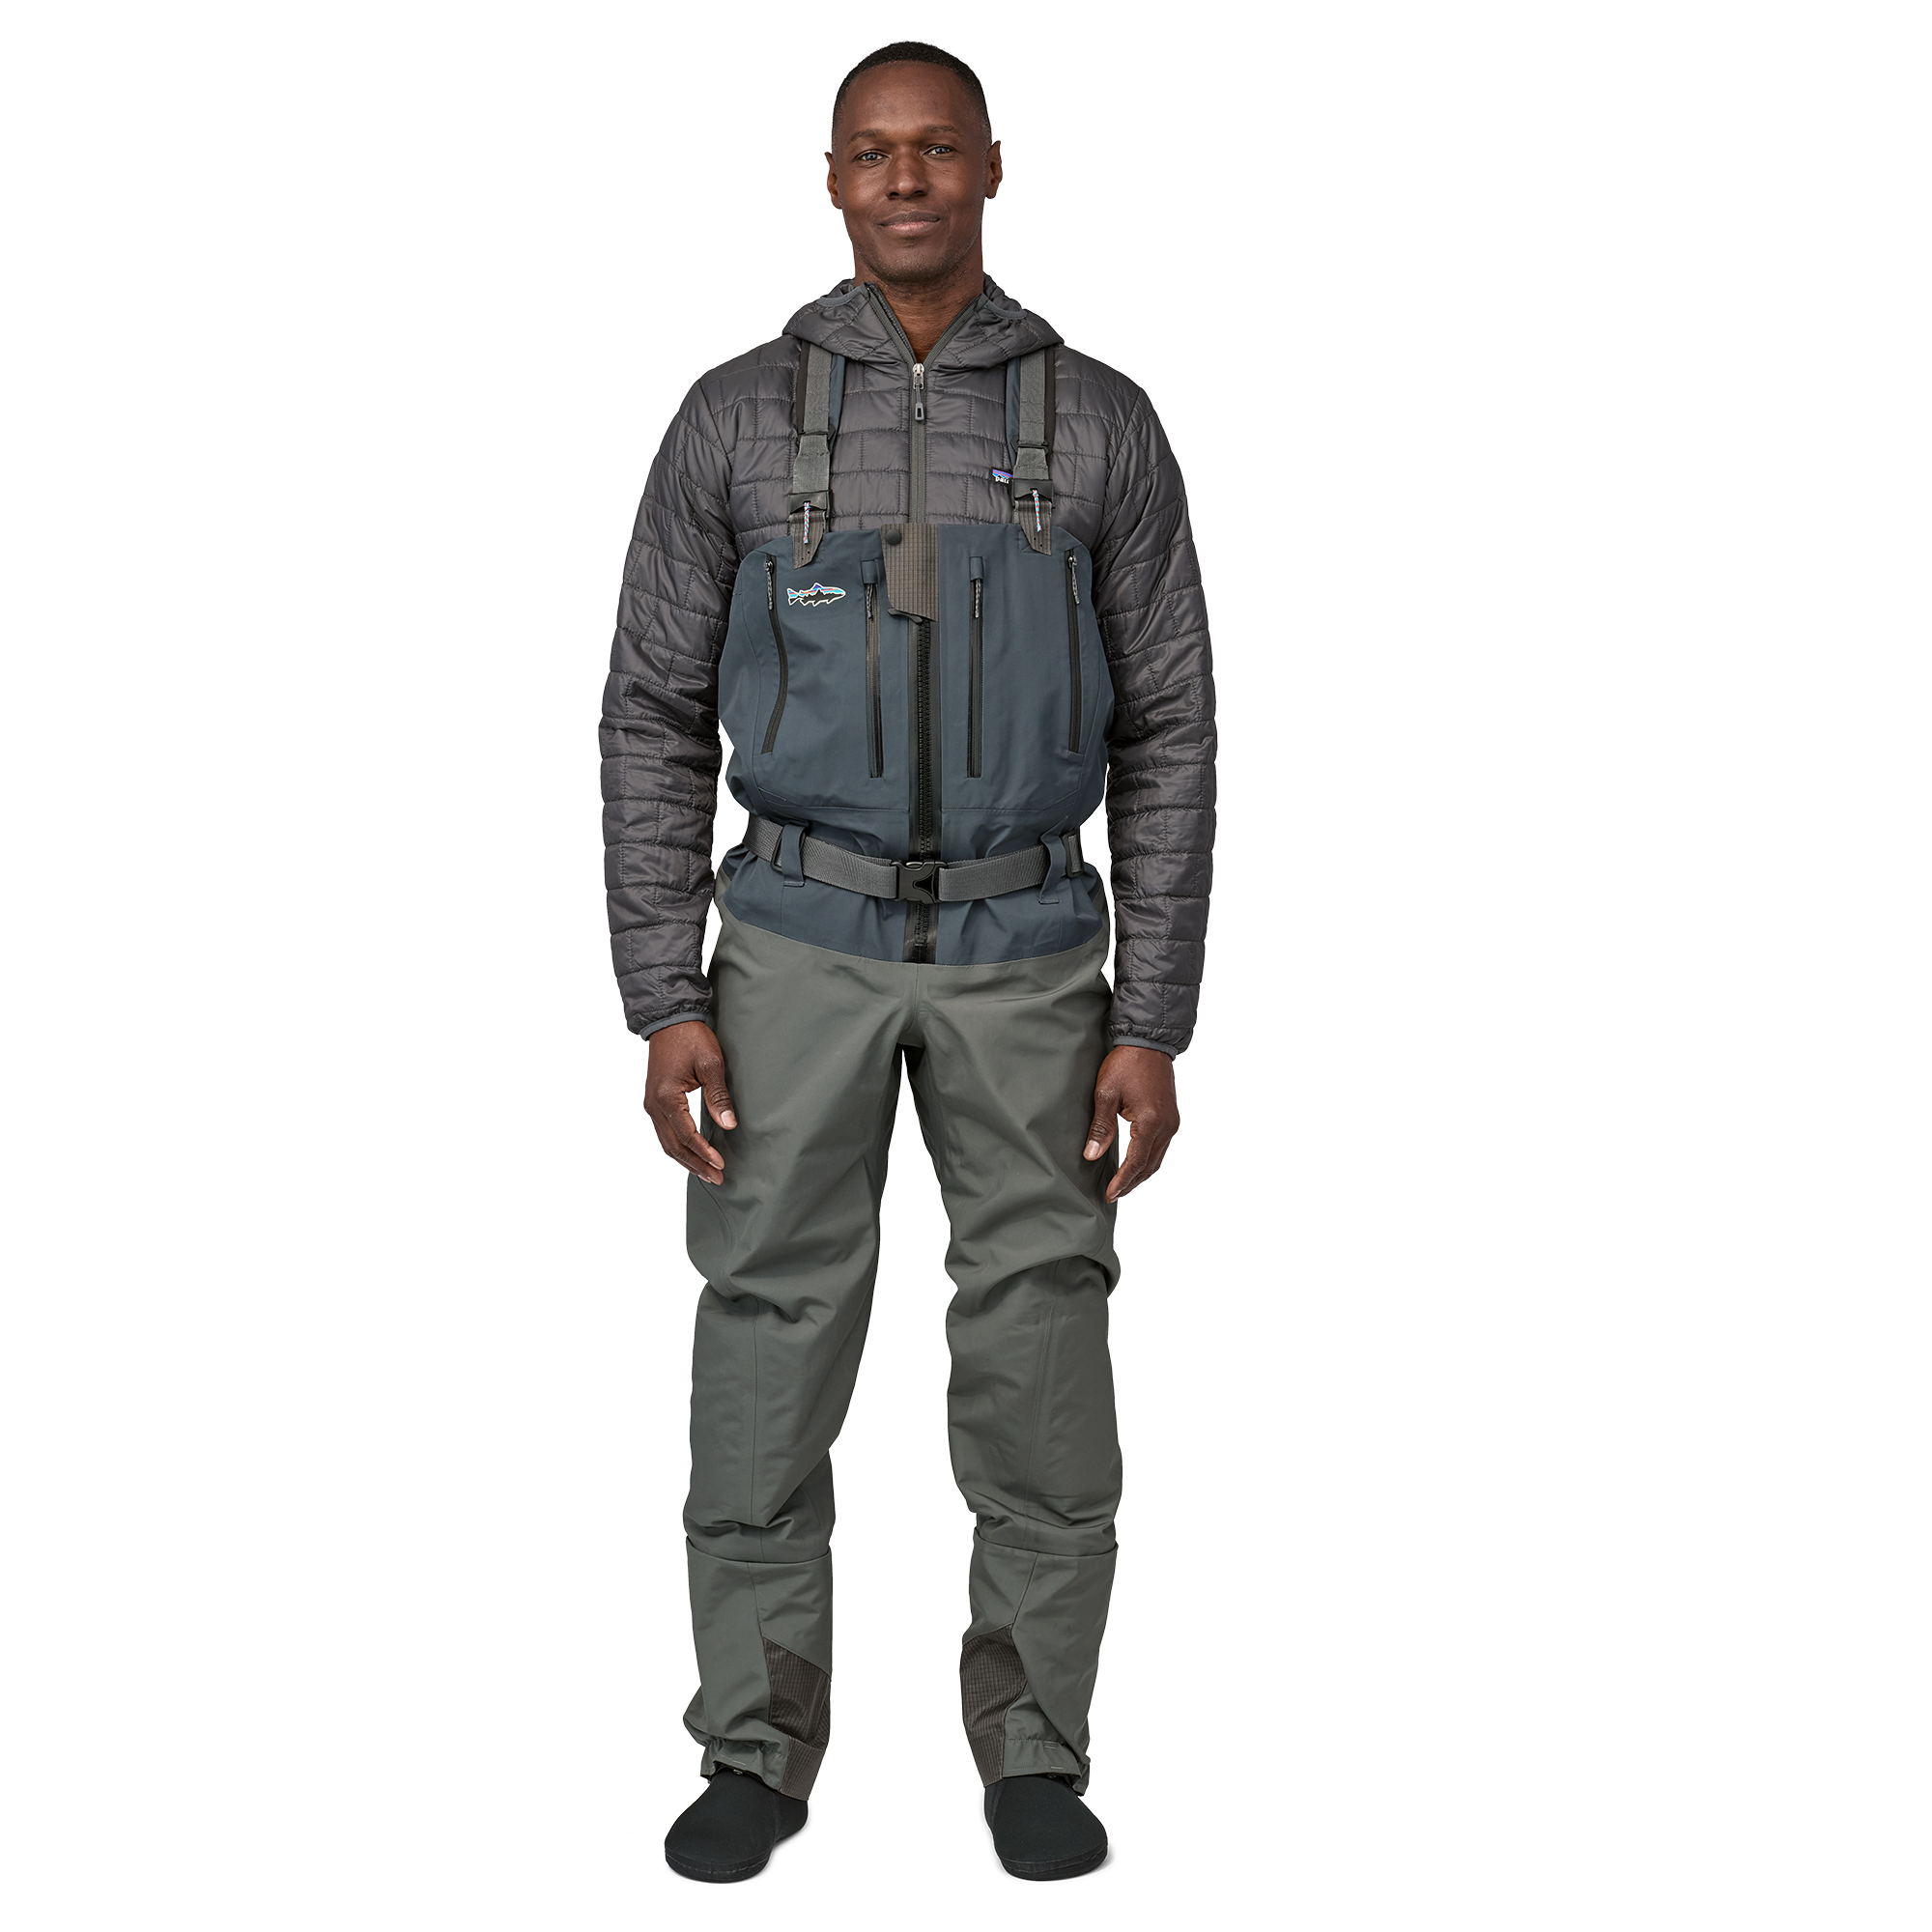 Patagonia Men's Swiftcurrent Expedition Zip-Front Waders LRL 12-14